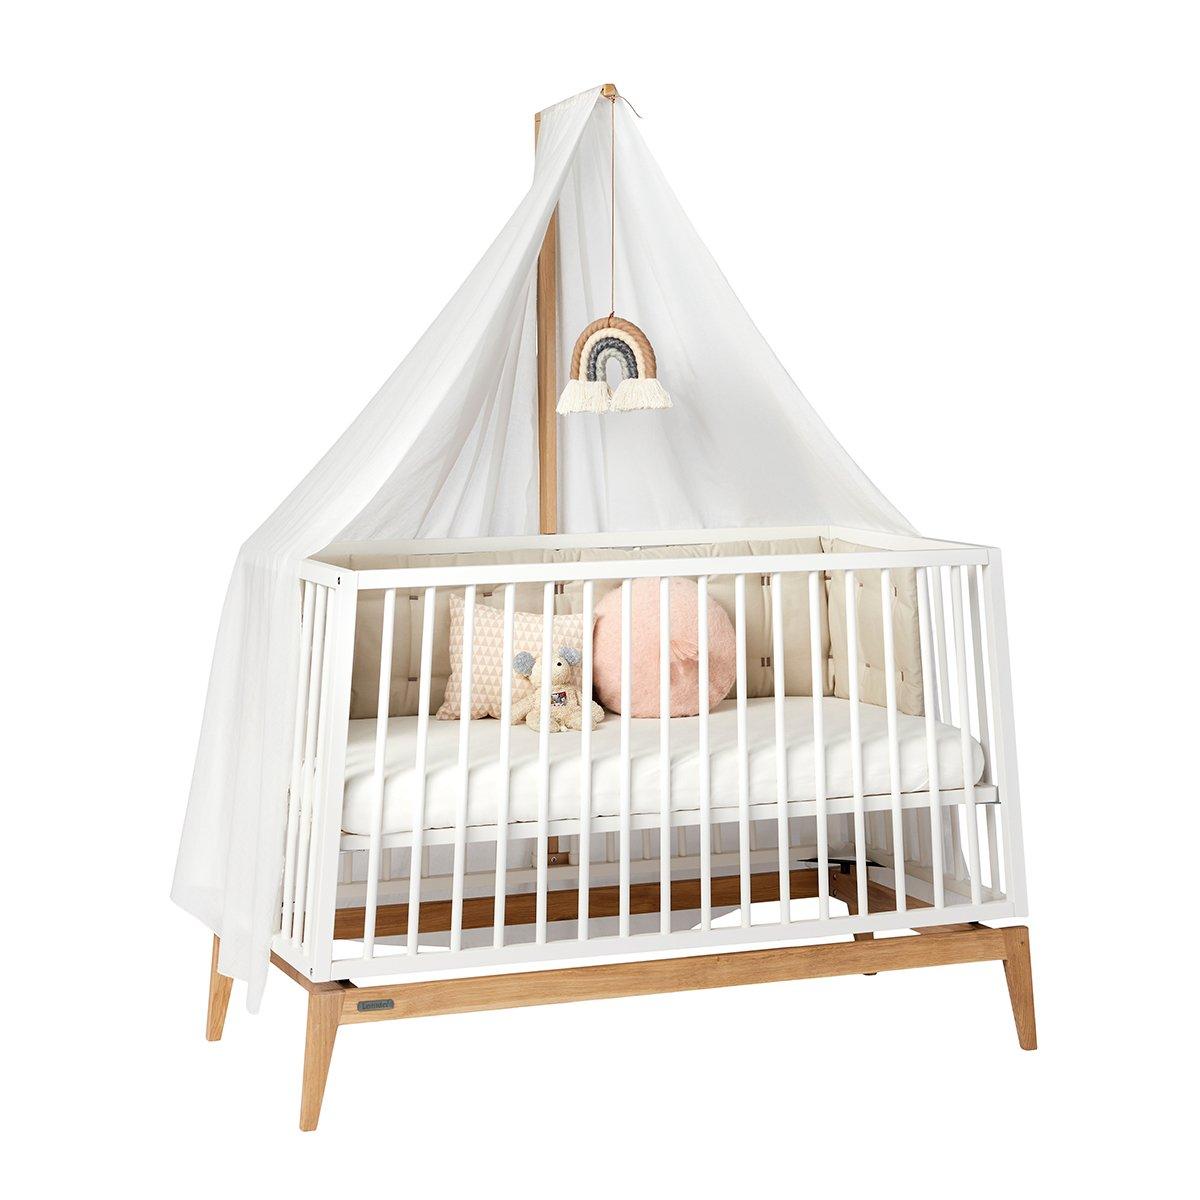 Leander: A canopy for Luna and Linea cot